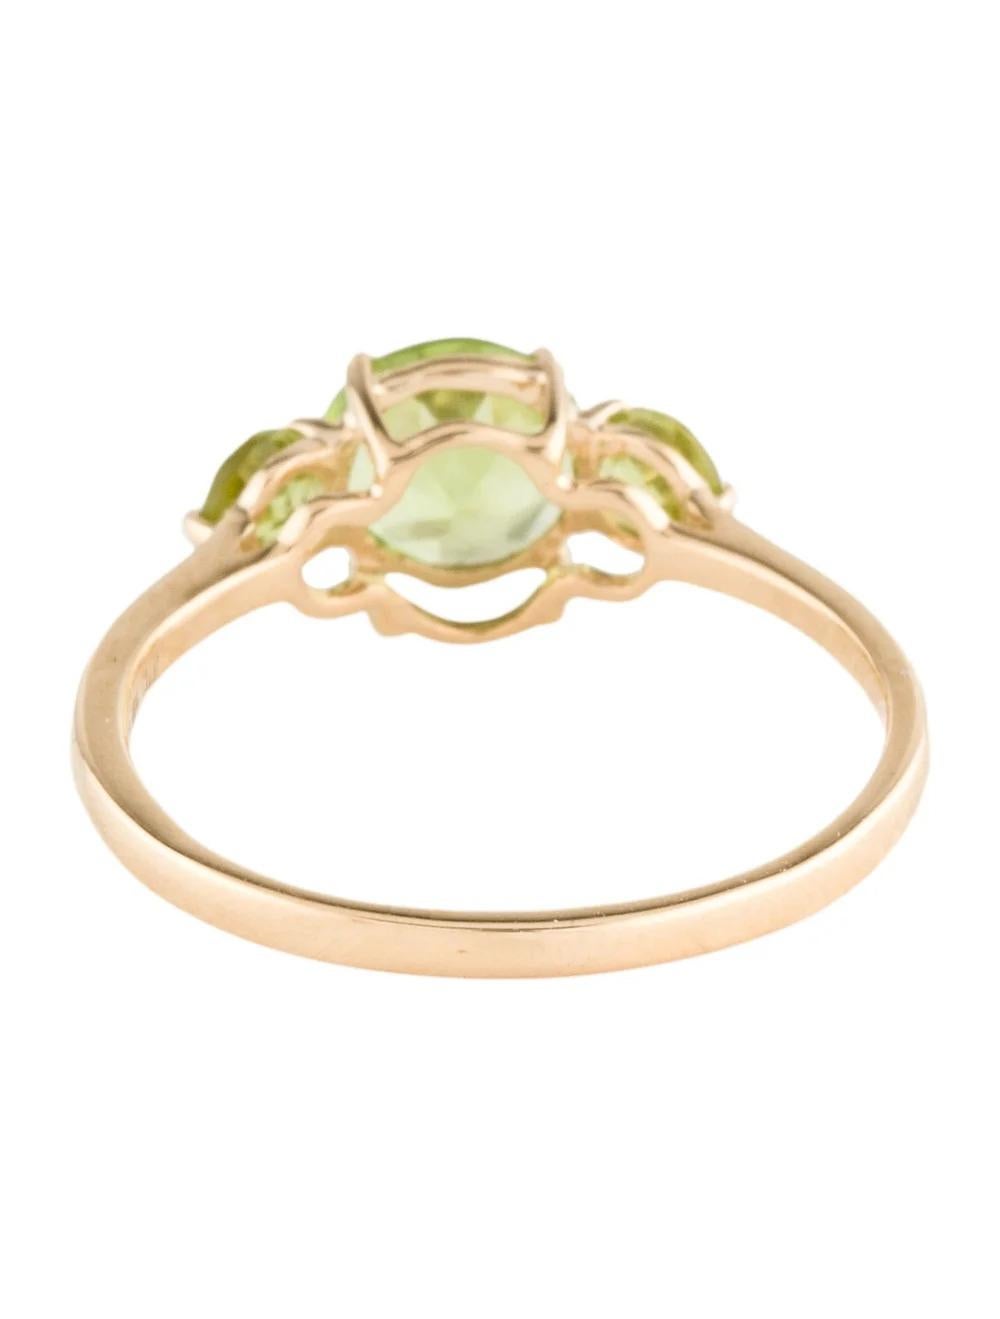 14K Peridot Cocktail Ring Size 6.75: Vibrant Green Gemstone, Elegant Yellow Gold In New Condition For Sale In Holtsville, NY